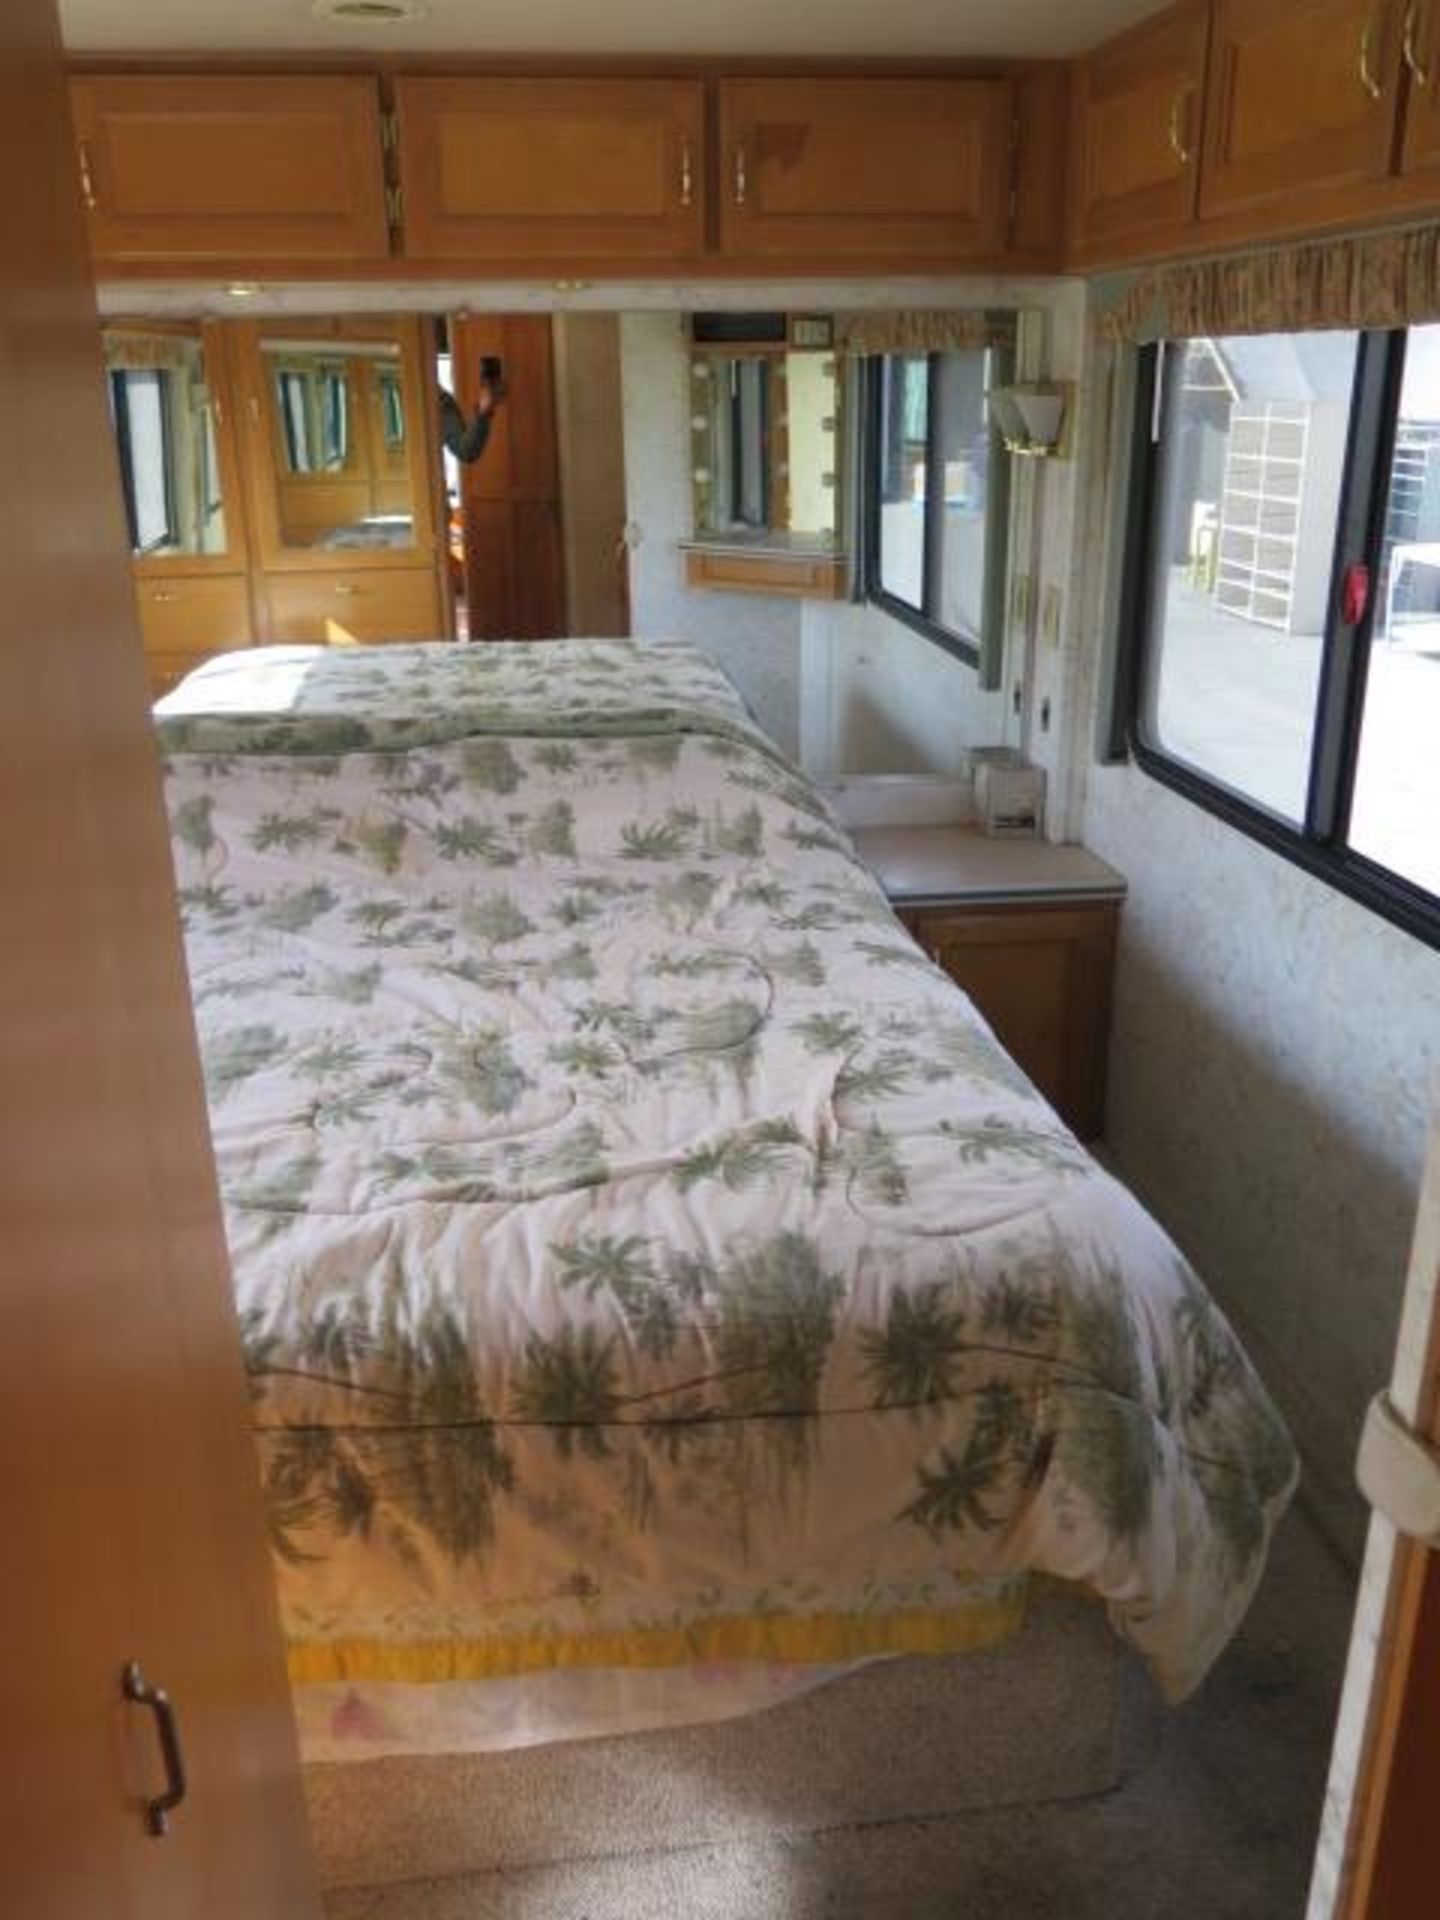 1997 Safari Motor Coacher Motor Home Lisc# 5PEJ100 w/ CAT Diesel Engine, Automatic Trans, SOLD AS IS - Image 44 of 54